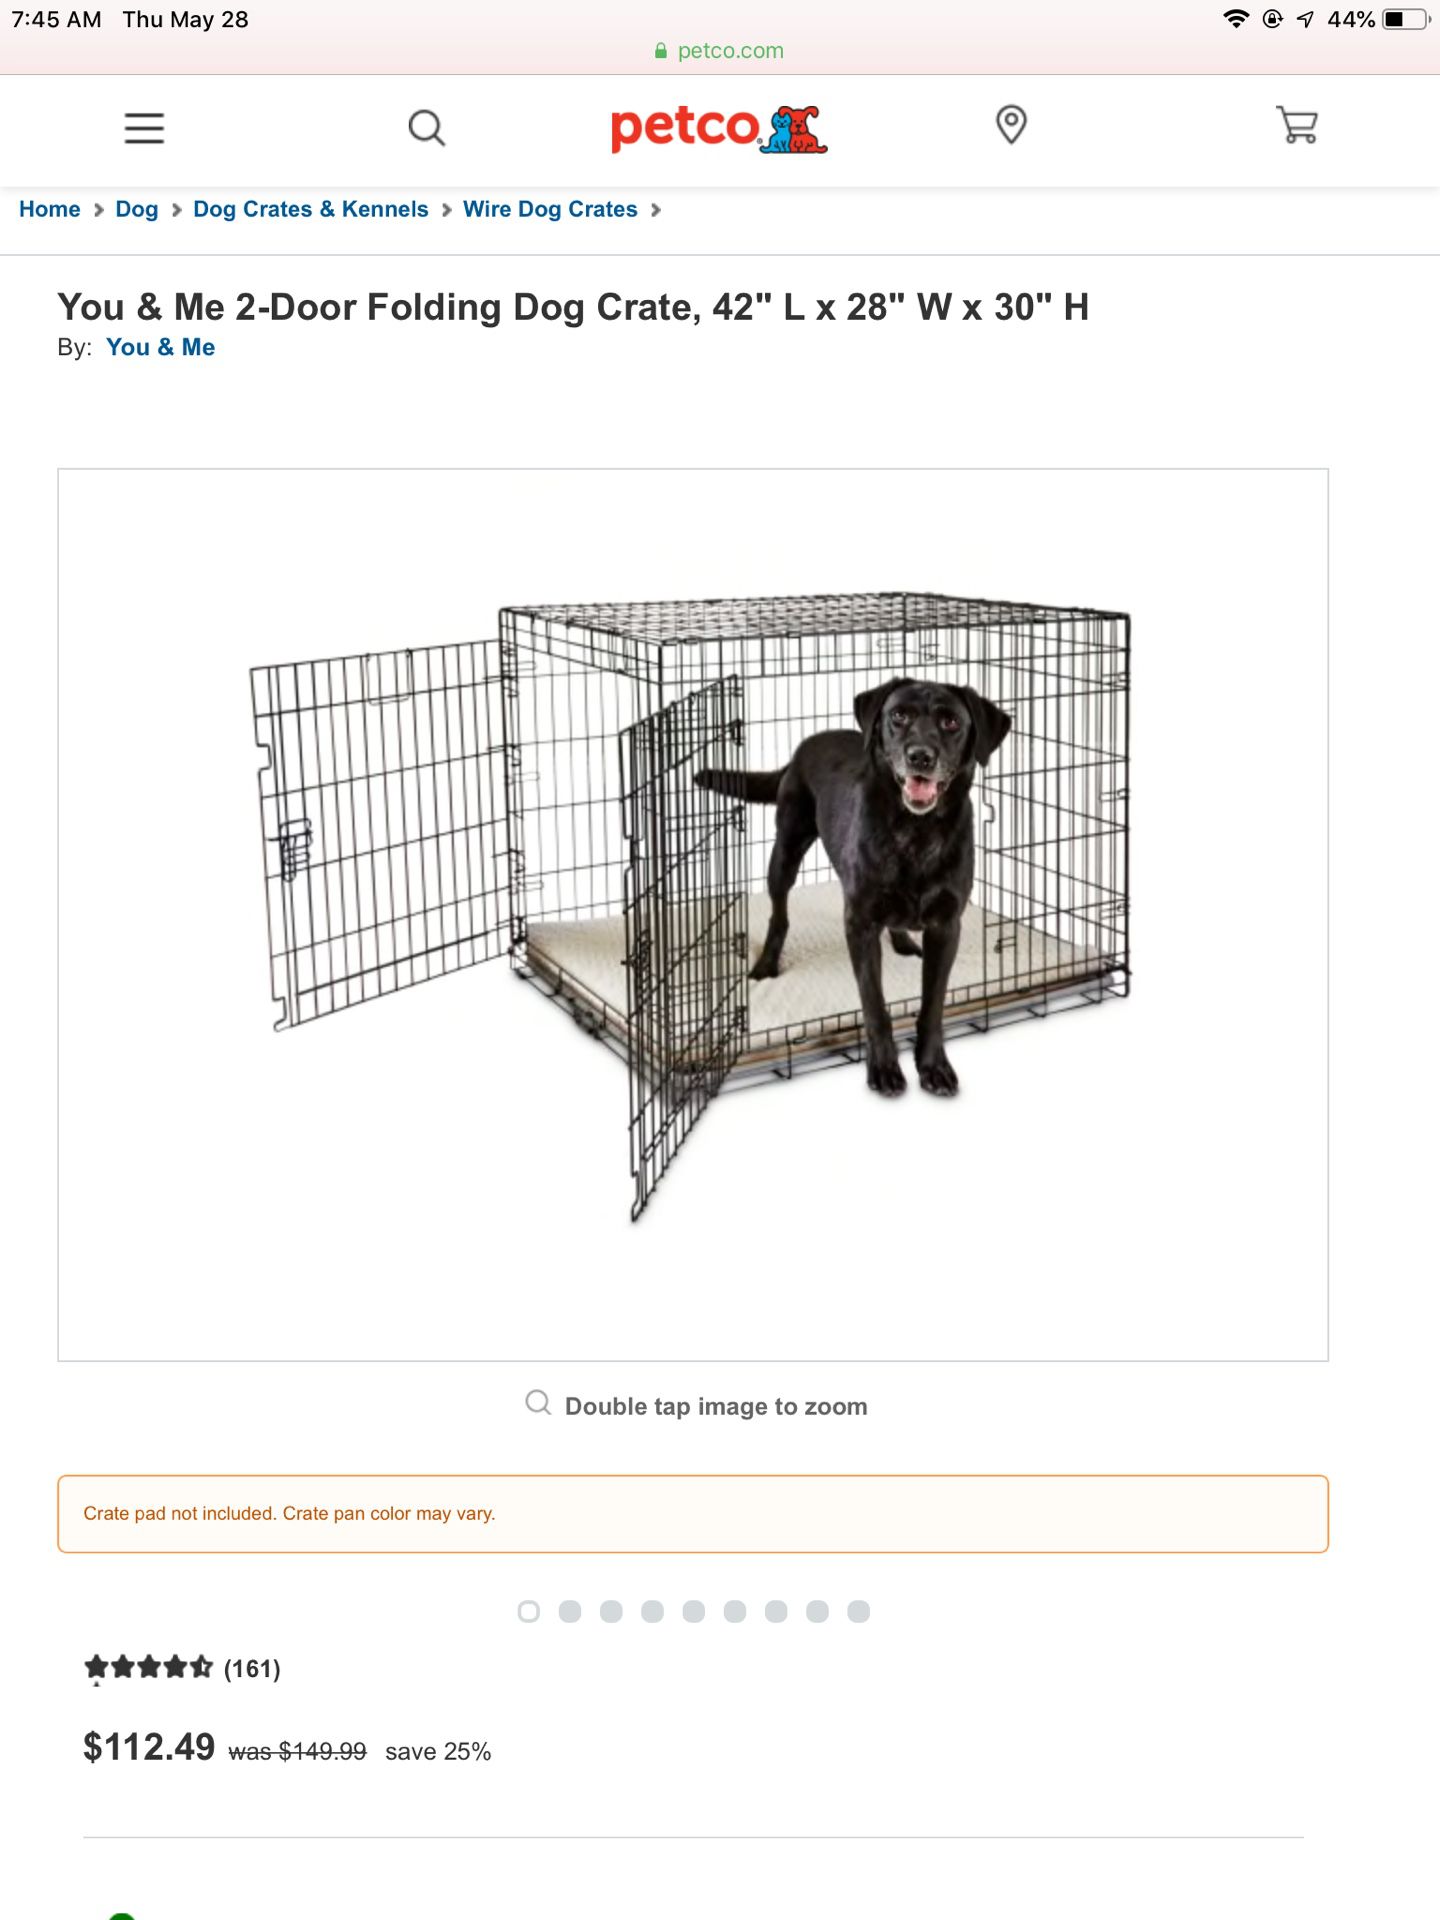 Xl large you & me folding dog crate/ cage